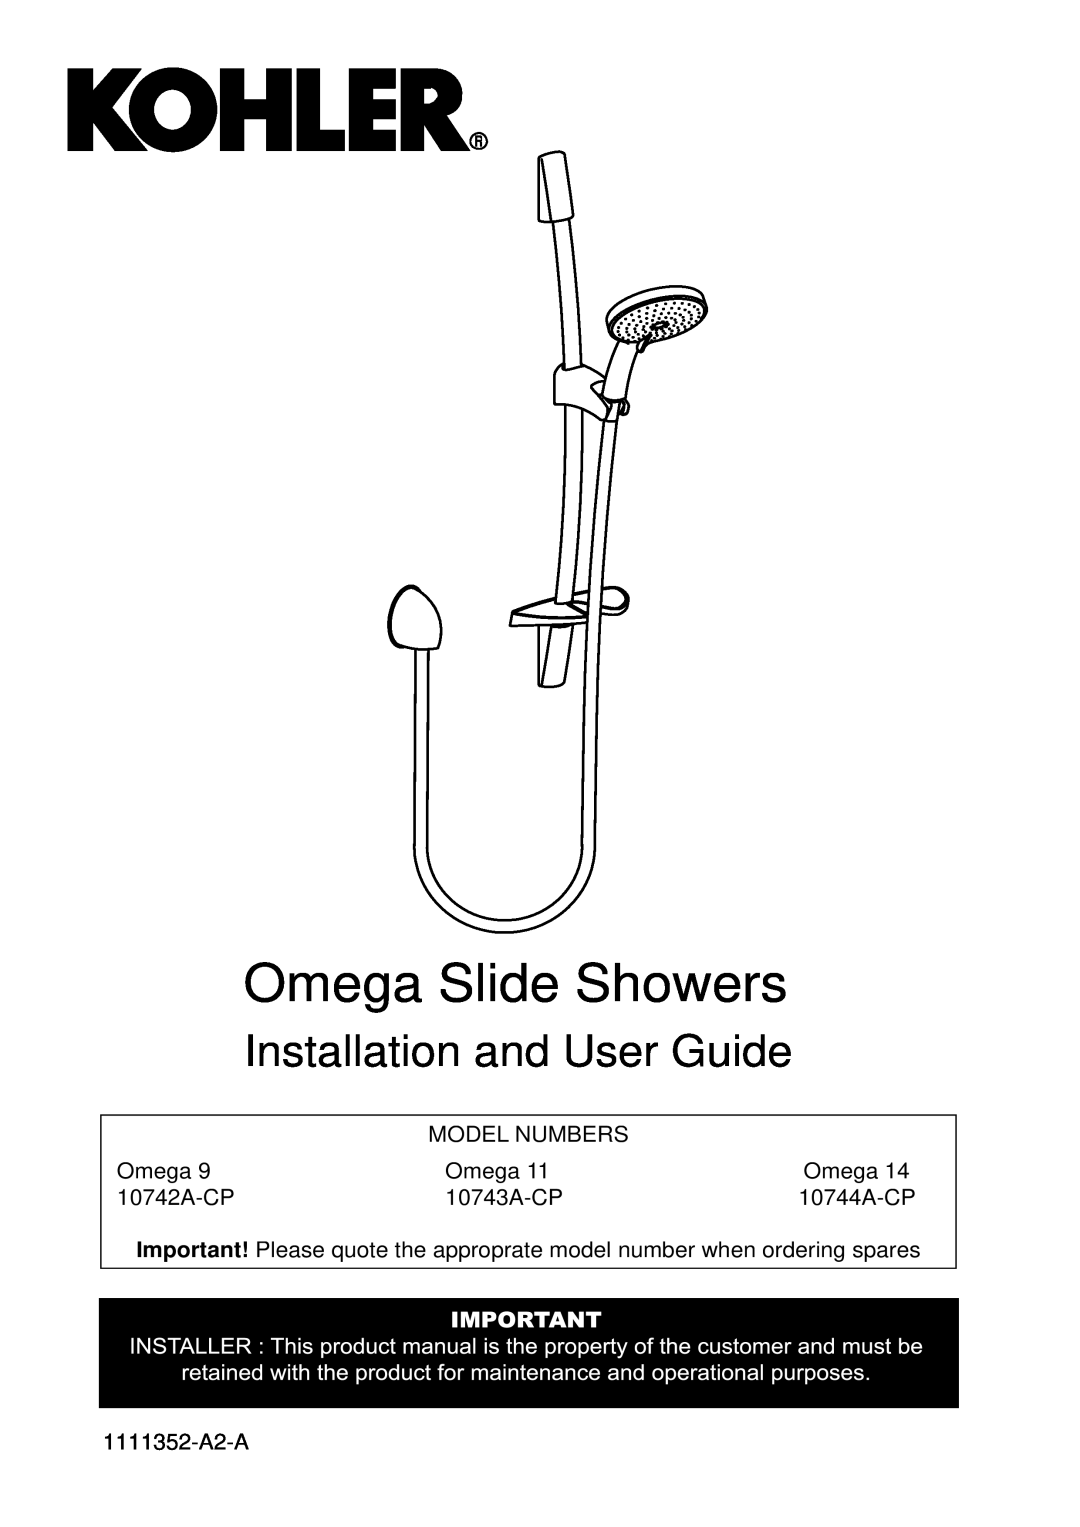 Kohler 10744A-CP manual Omega Slide Showers, Installation and User Guide, Model Numbers, 10742A-CP, 10743A-CP 